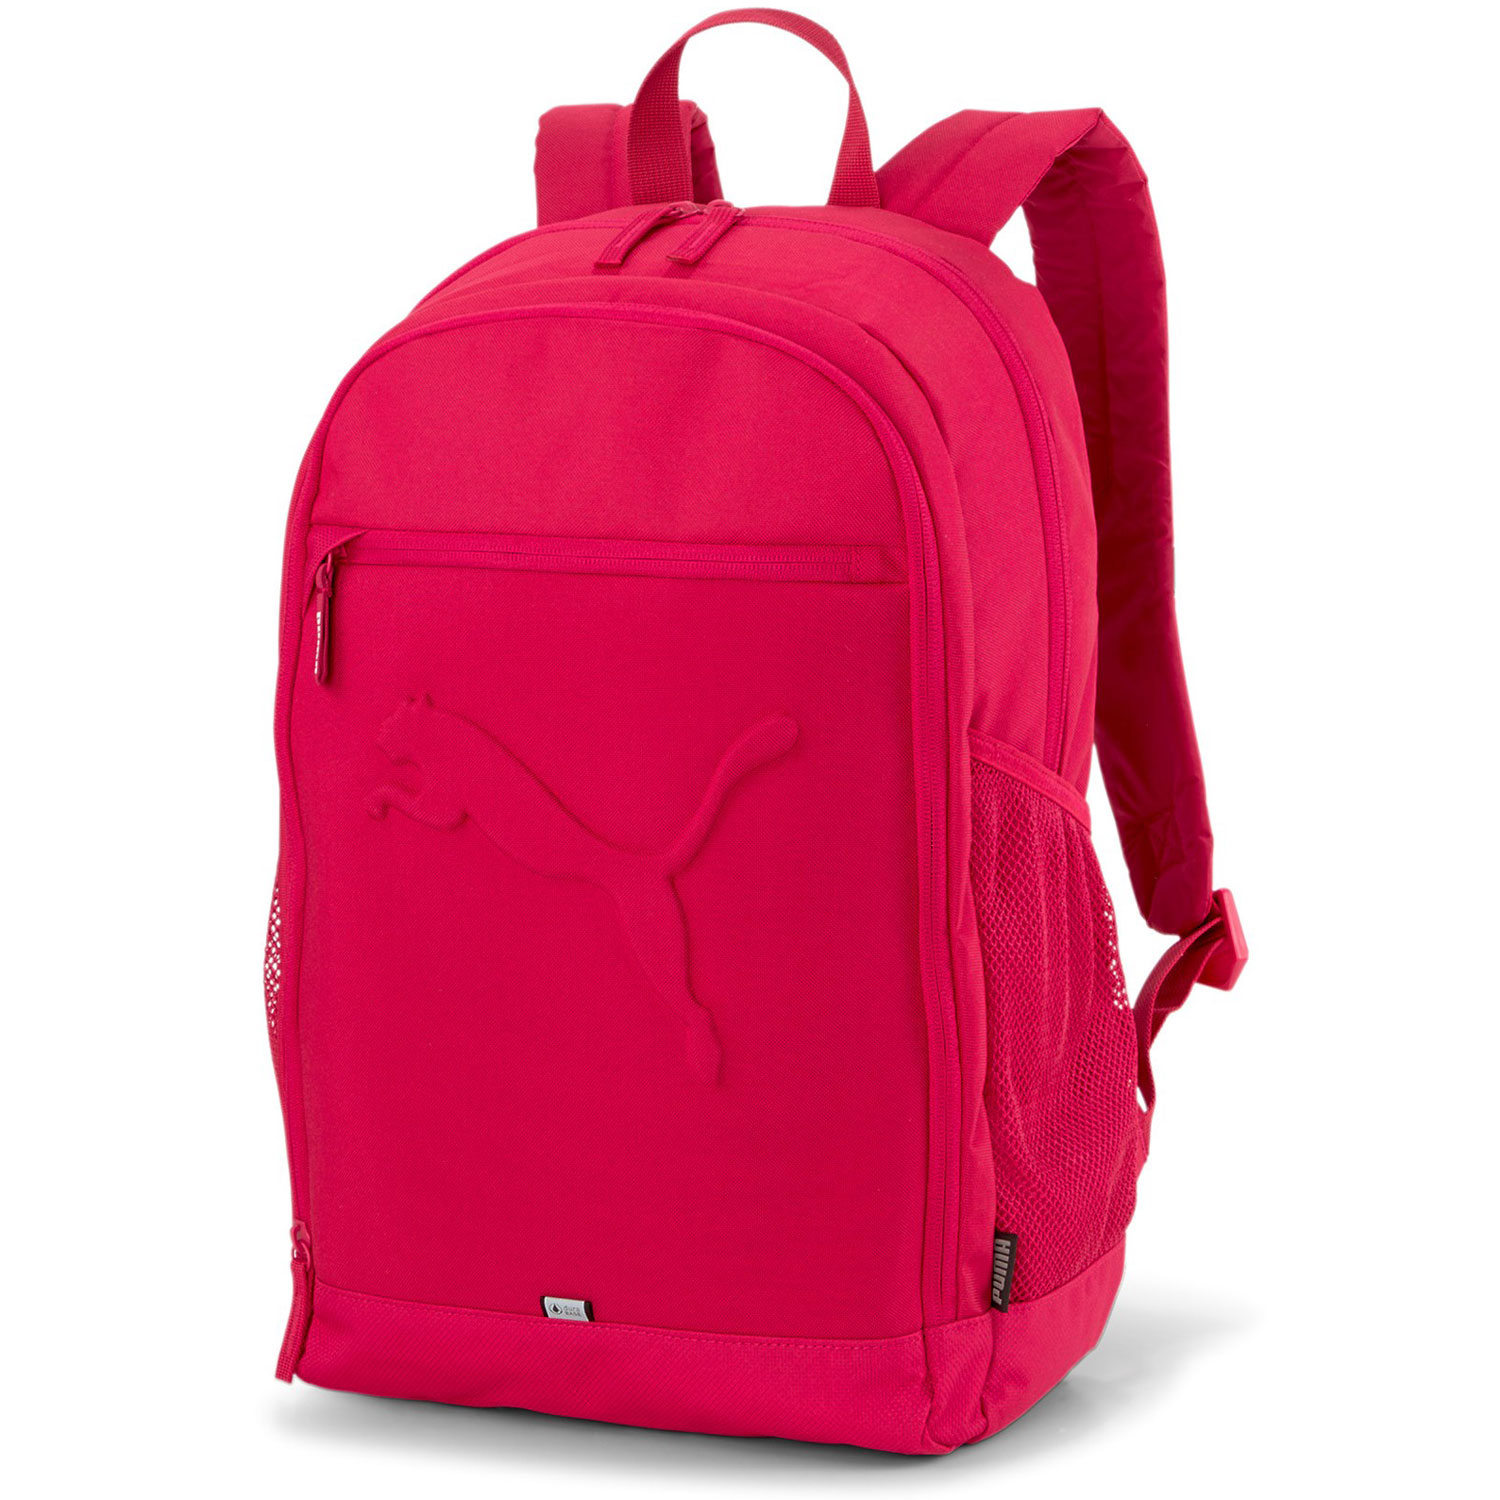 Puma Backpack Buzz persian red